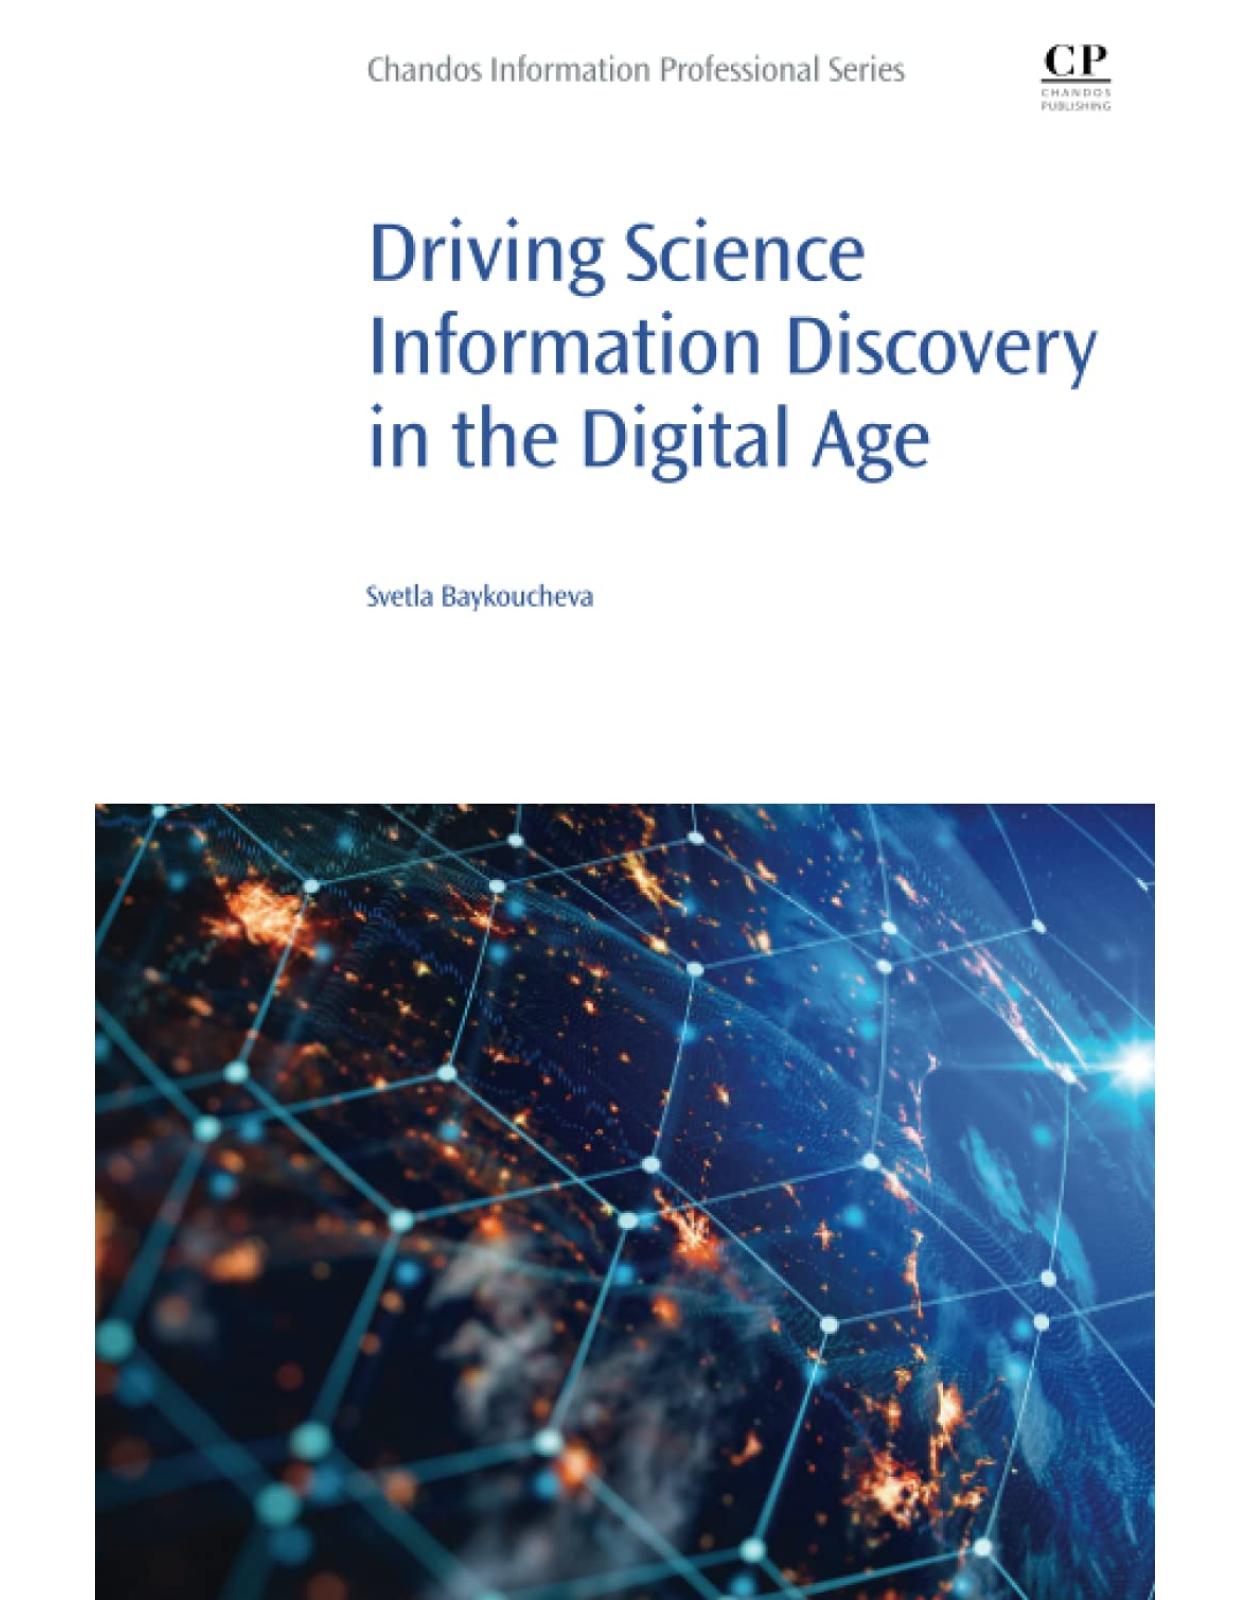 Driving Science Information Discovery in the Digital Age (Chandos Information Professional Series)